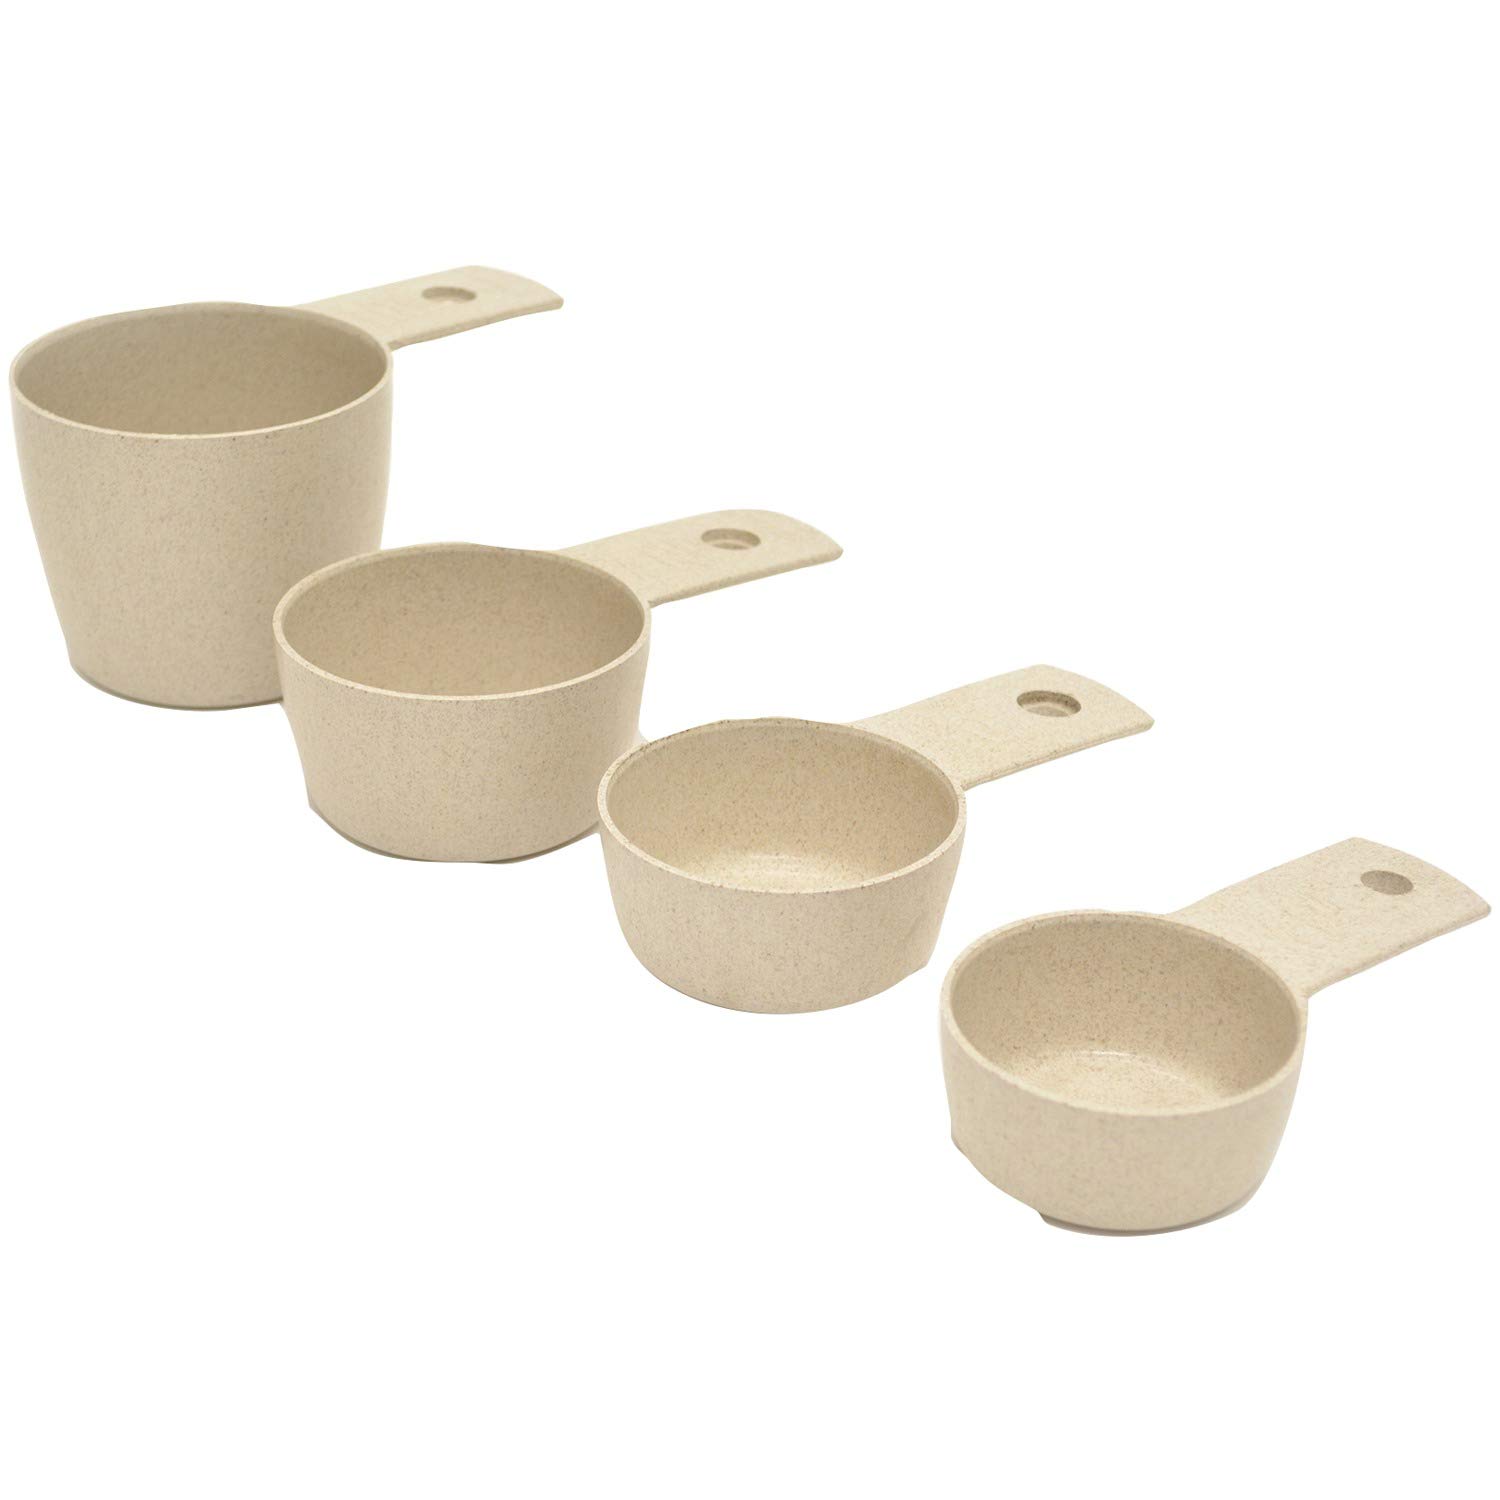 Gourmet By Starfrit T080284 ECO Measuring Cup Set, One Size, White